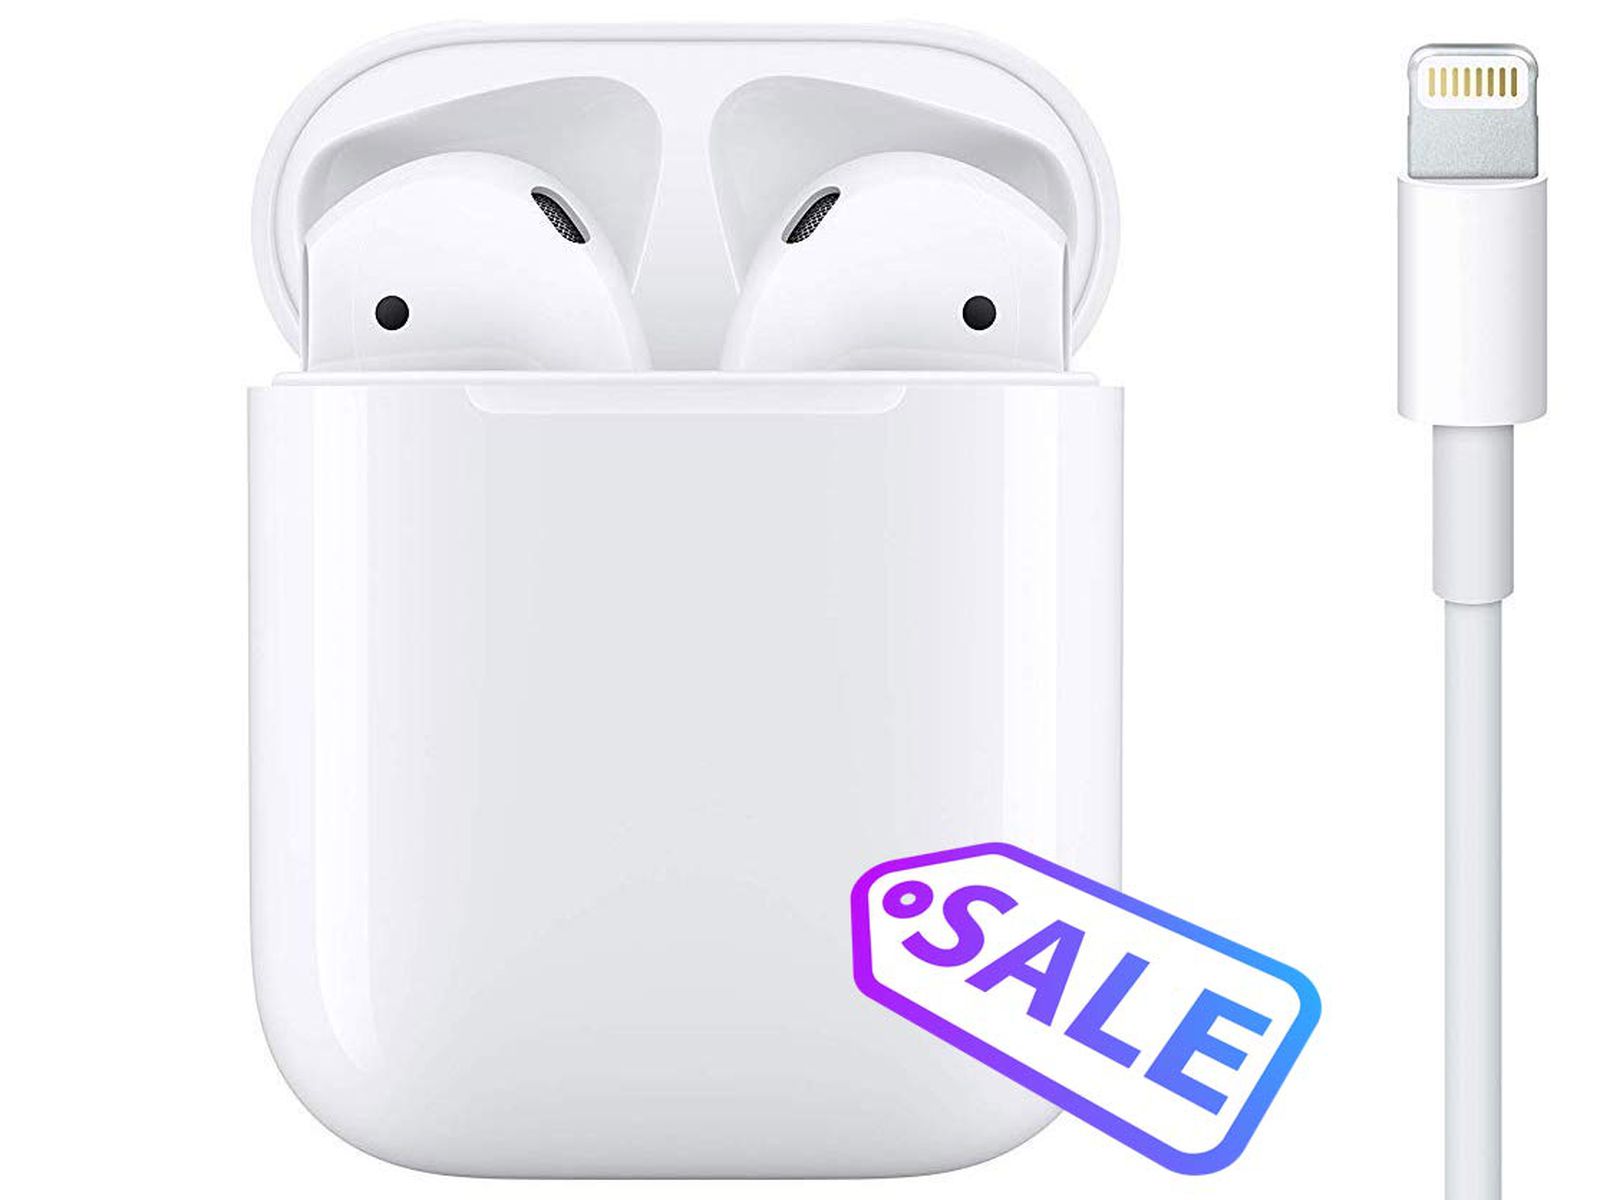 Deals: AirPods With Charging Case Sale for Low Price of $129.98 ($29 Off) - MacRumors